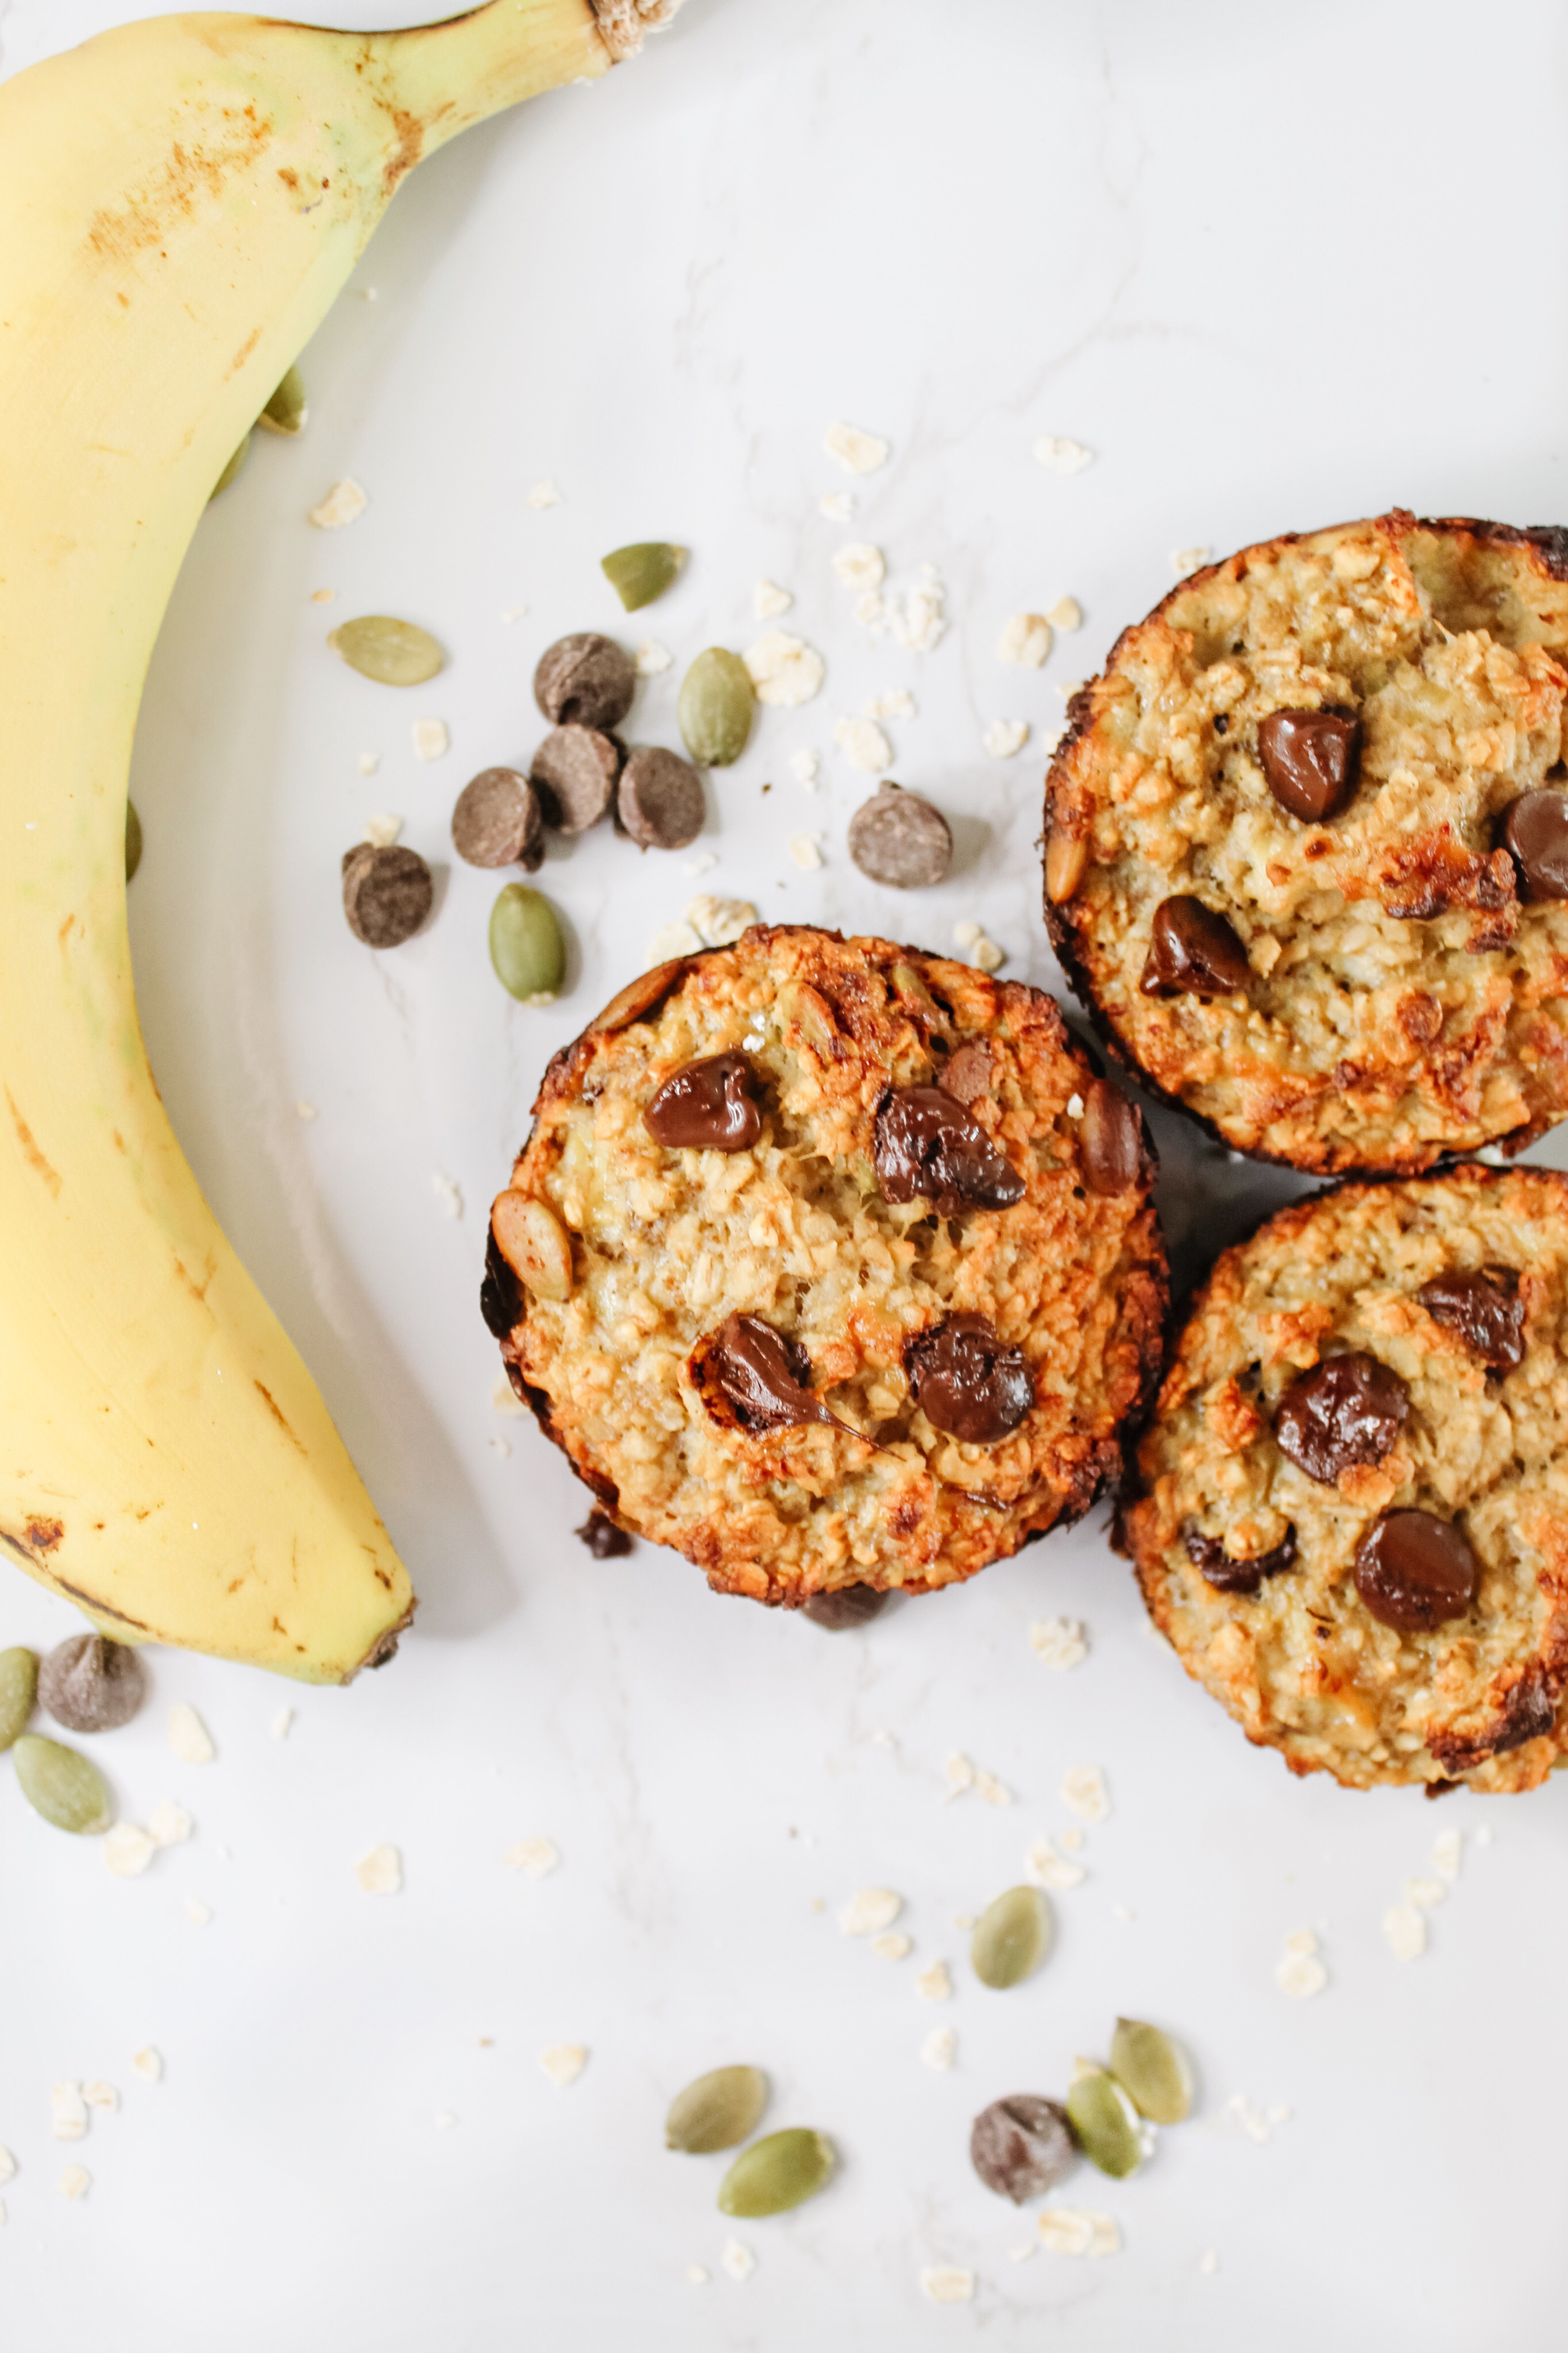 healthy banana oat muffins - sugar free and gluten free healthy muffins are a great kid friendly snack